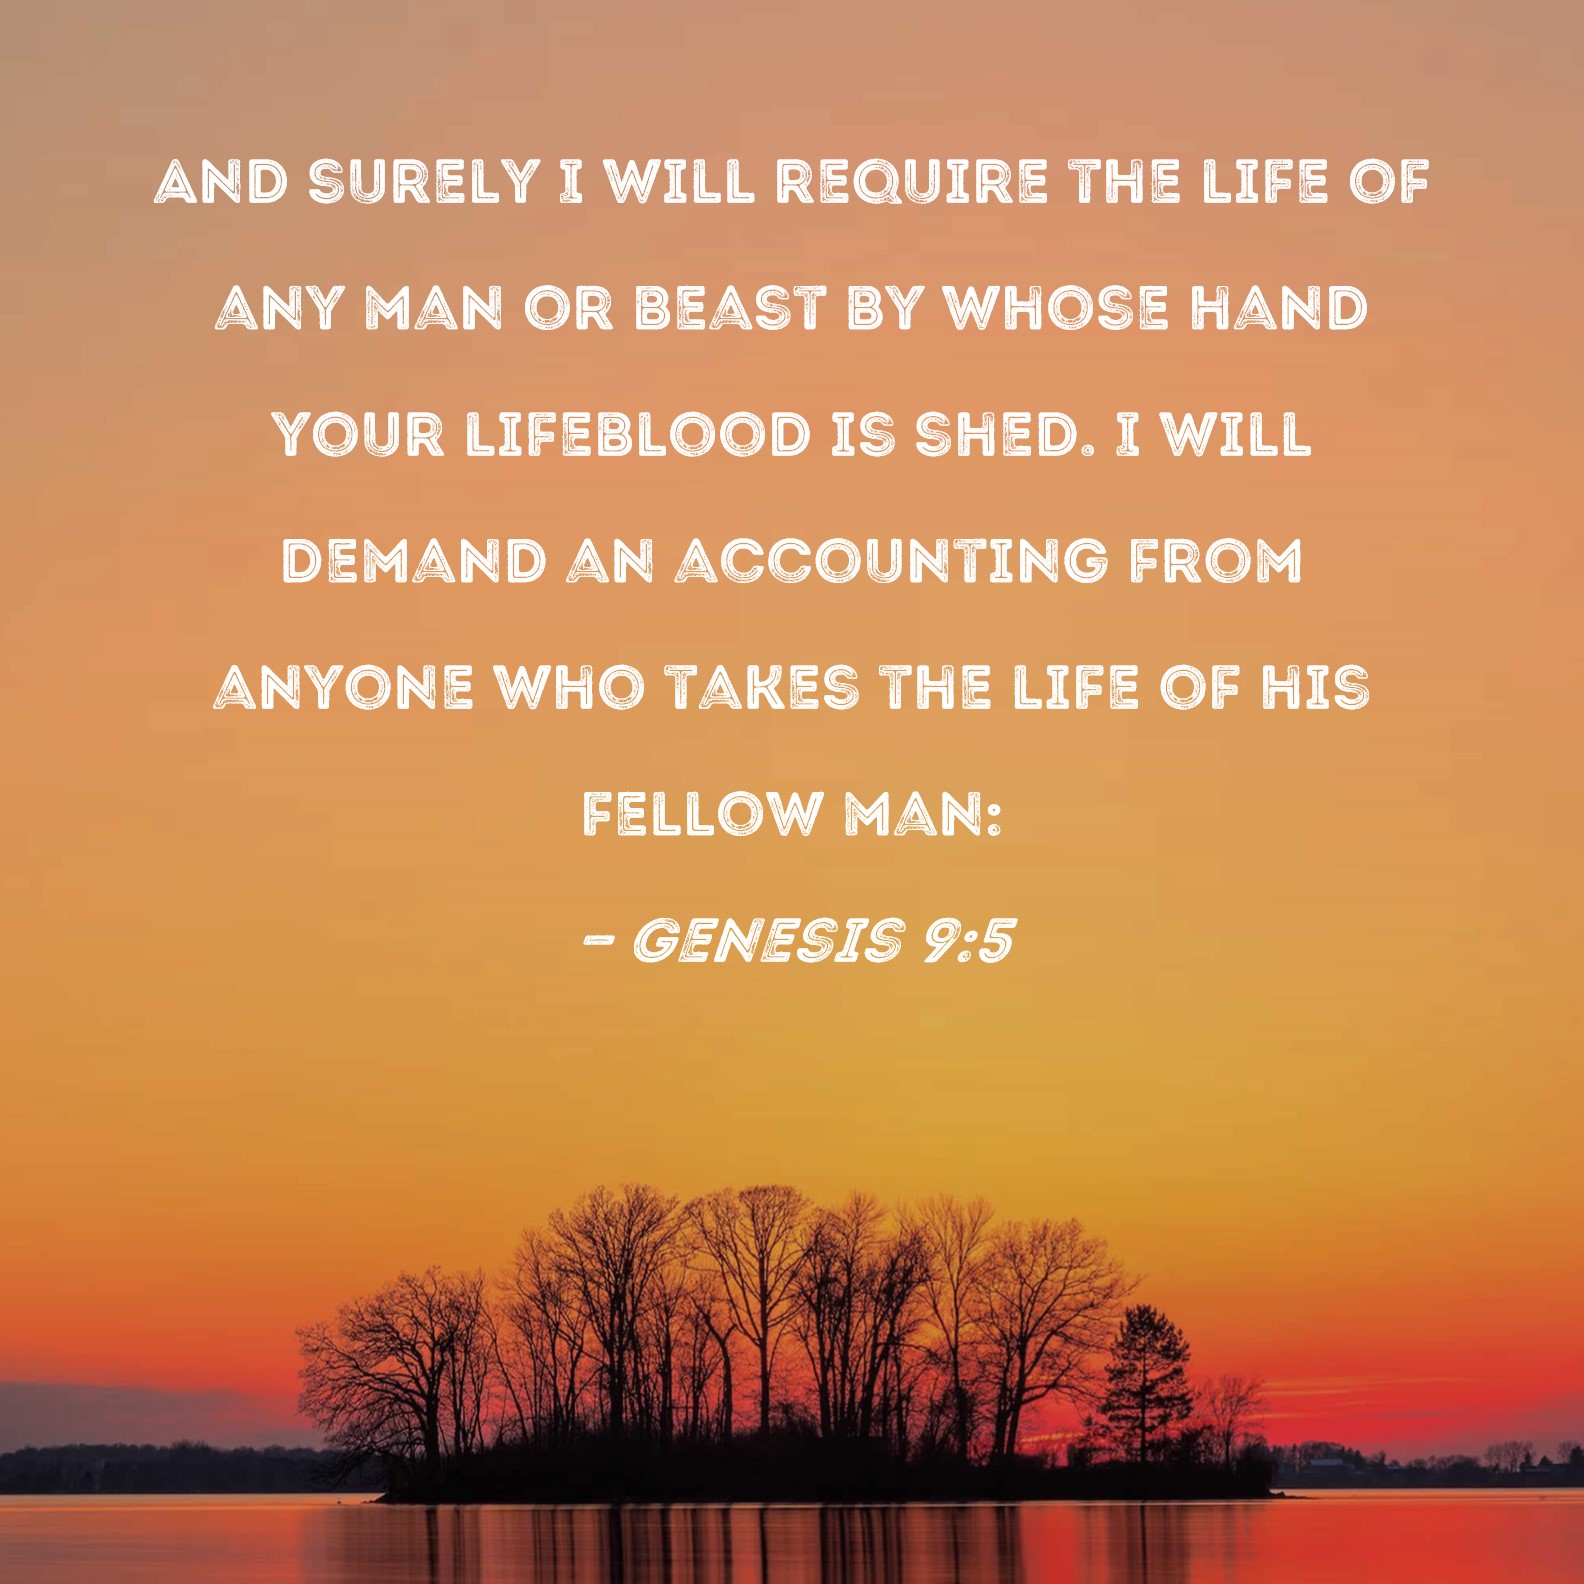 Genesis 9:5 And surely I will require the life of any man or beast by whose  hand your lifeblood is shed. I will demand an accounting from anyone who  takes the life